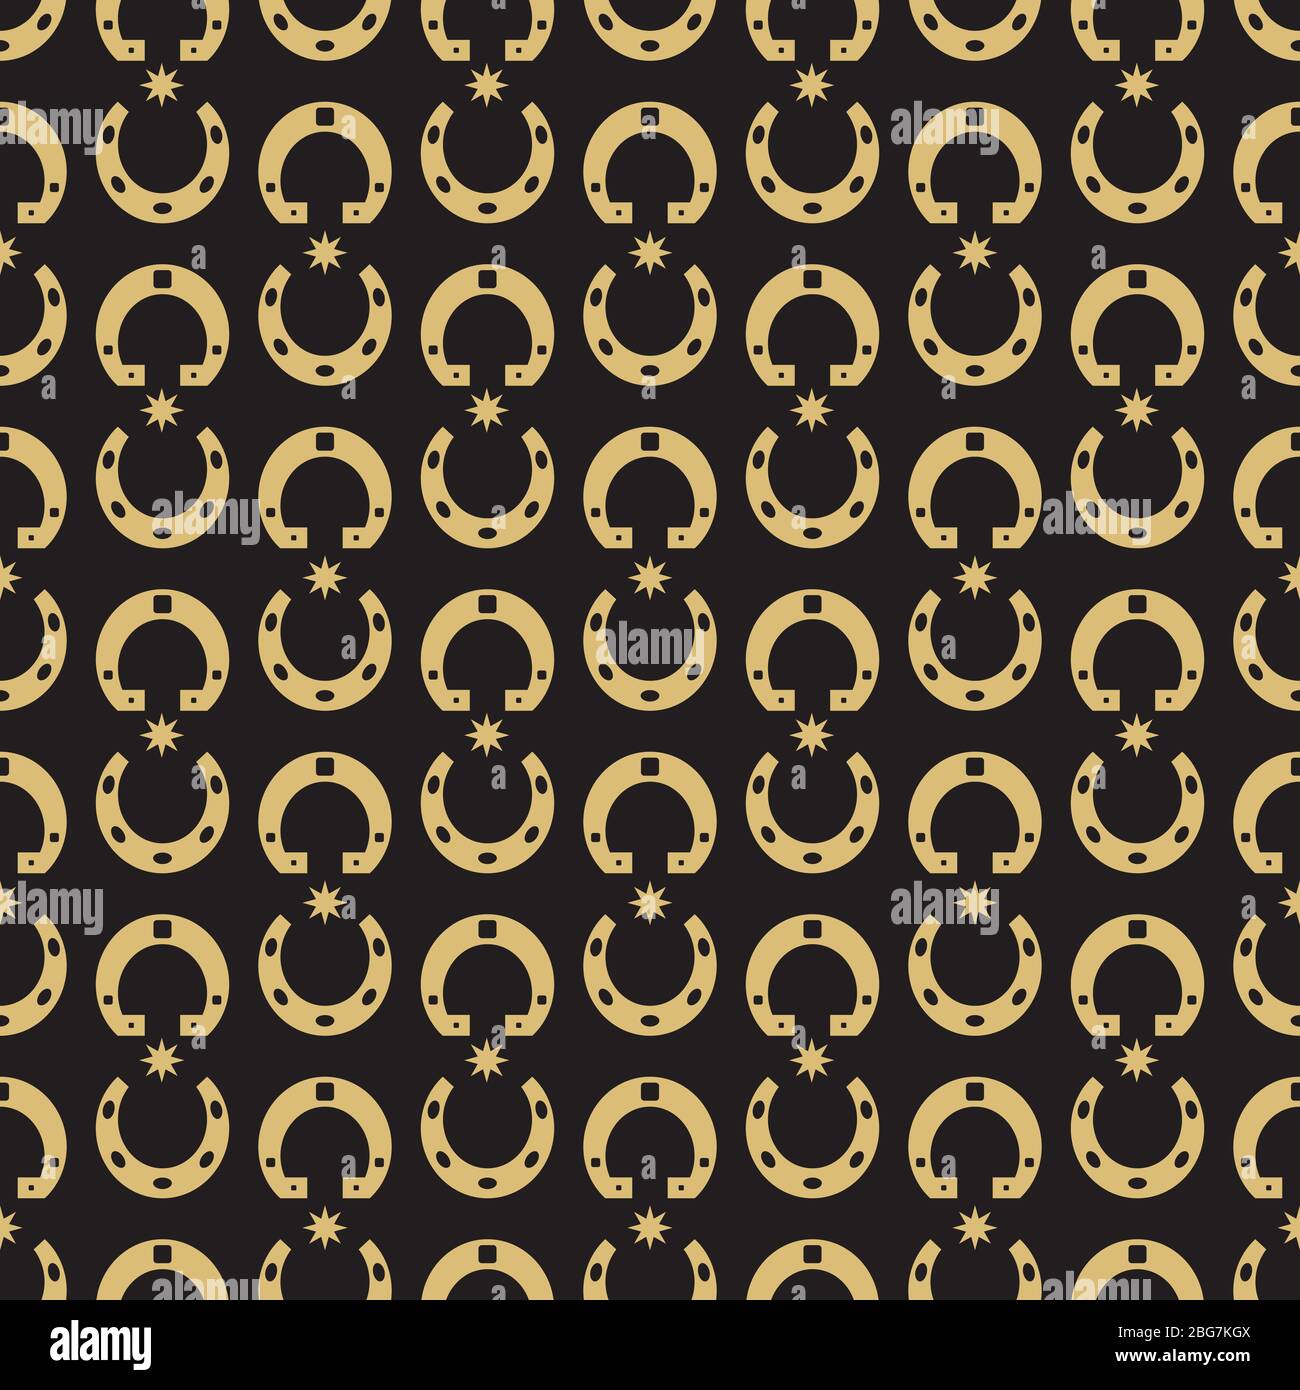 Gold horse shoe and stars seamless pattern background. Vector illustration Stock Vector